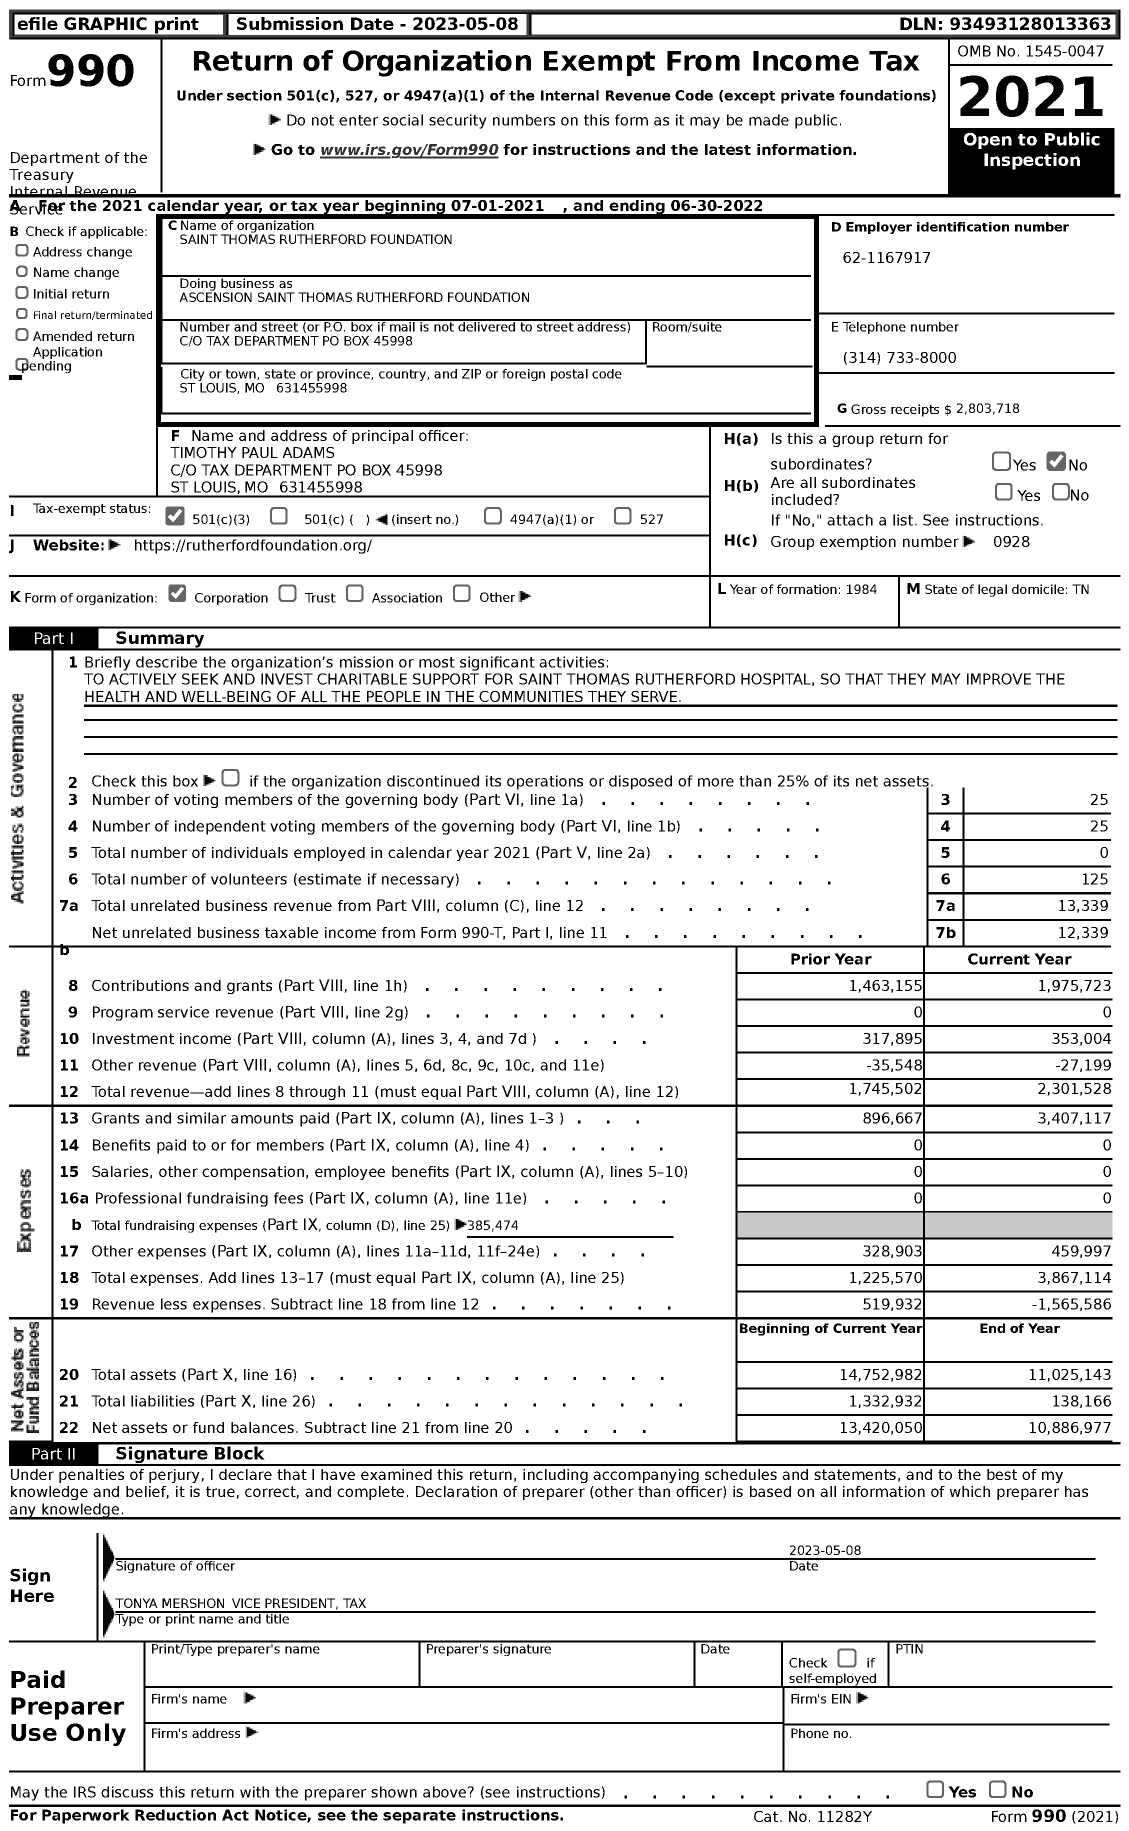 Image of first page of 2021 Form 990 for Ascension Saint Thomas Rutherford Foundation